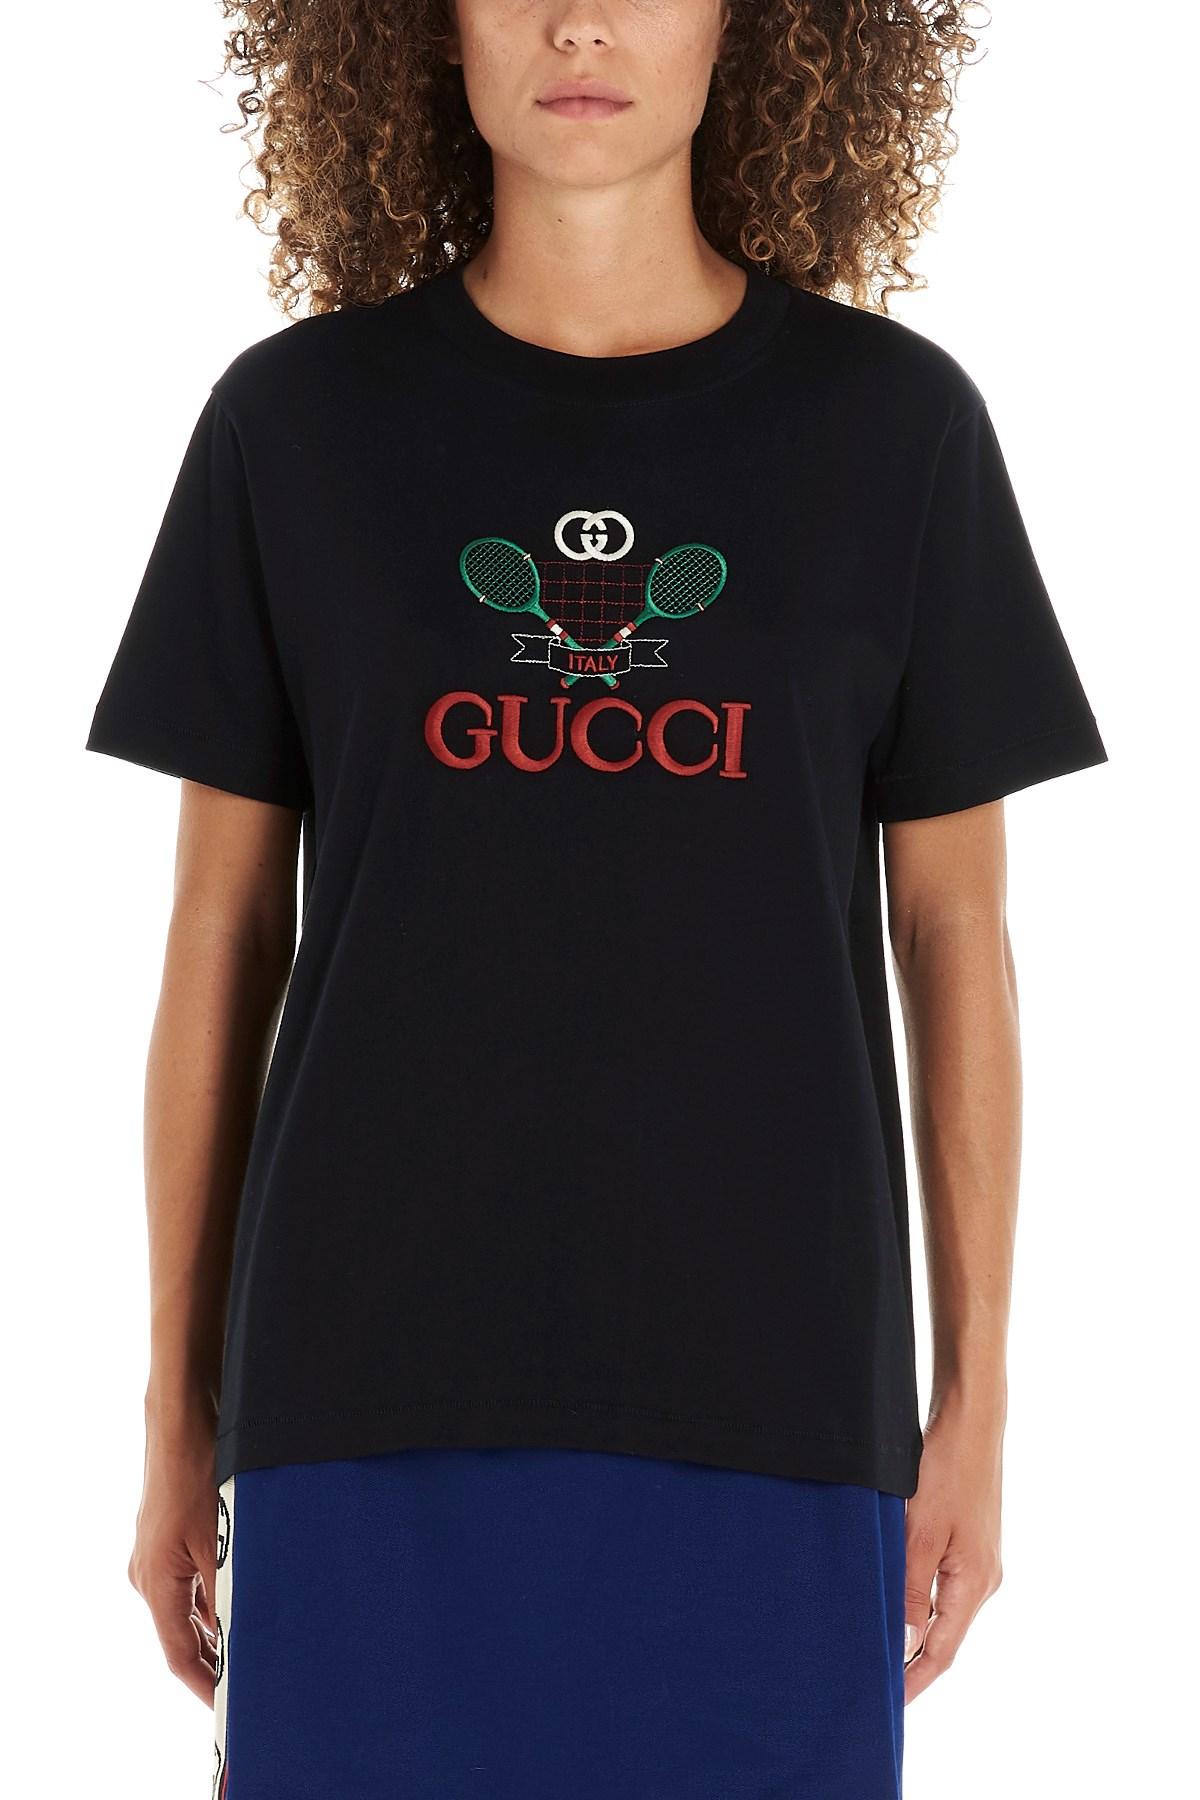 Gucci Tennis Embroidered Pattern Black - Lyst